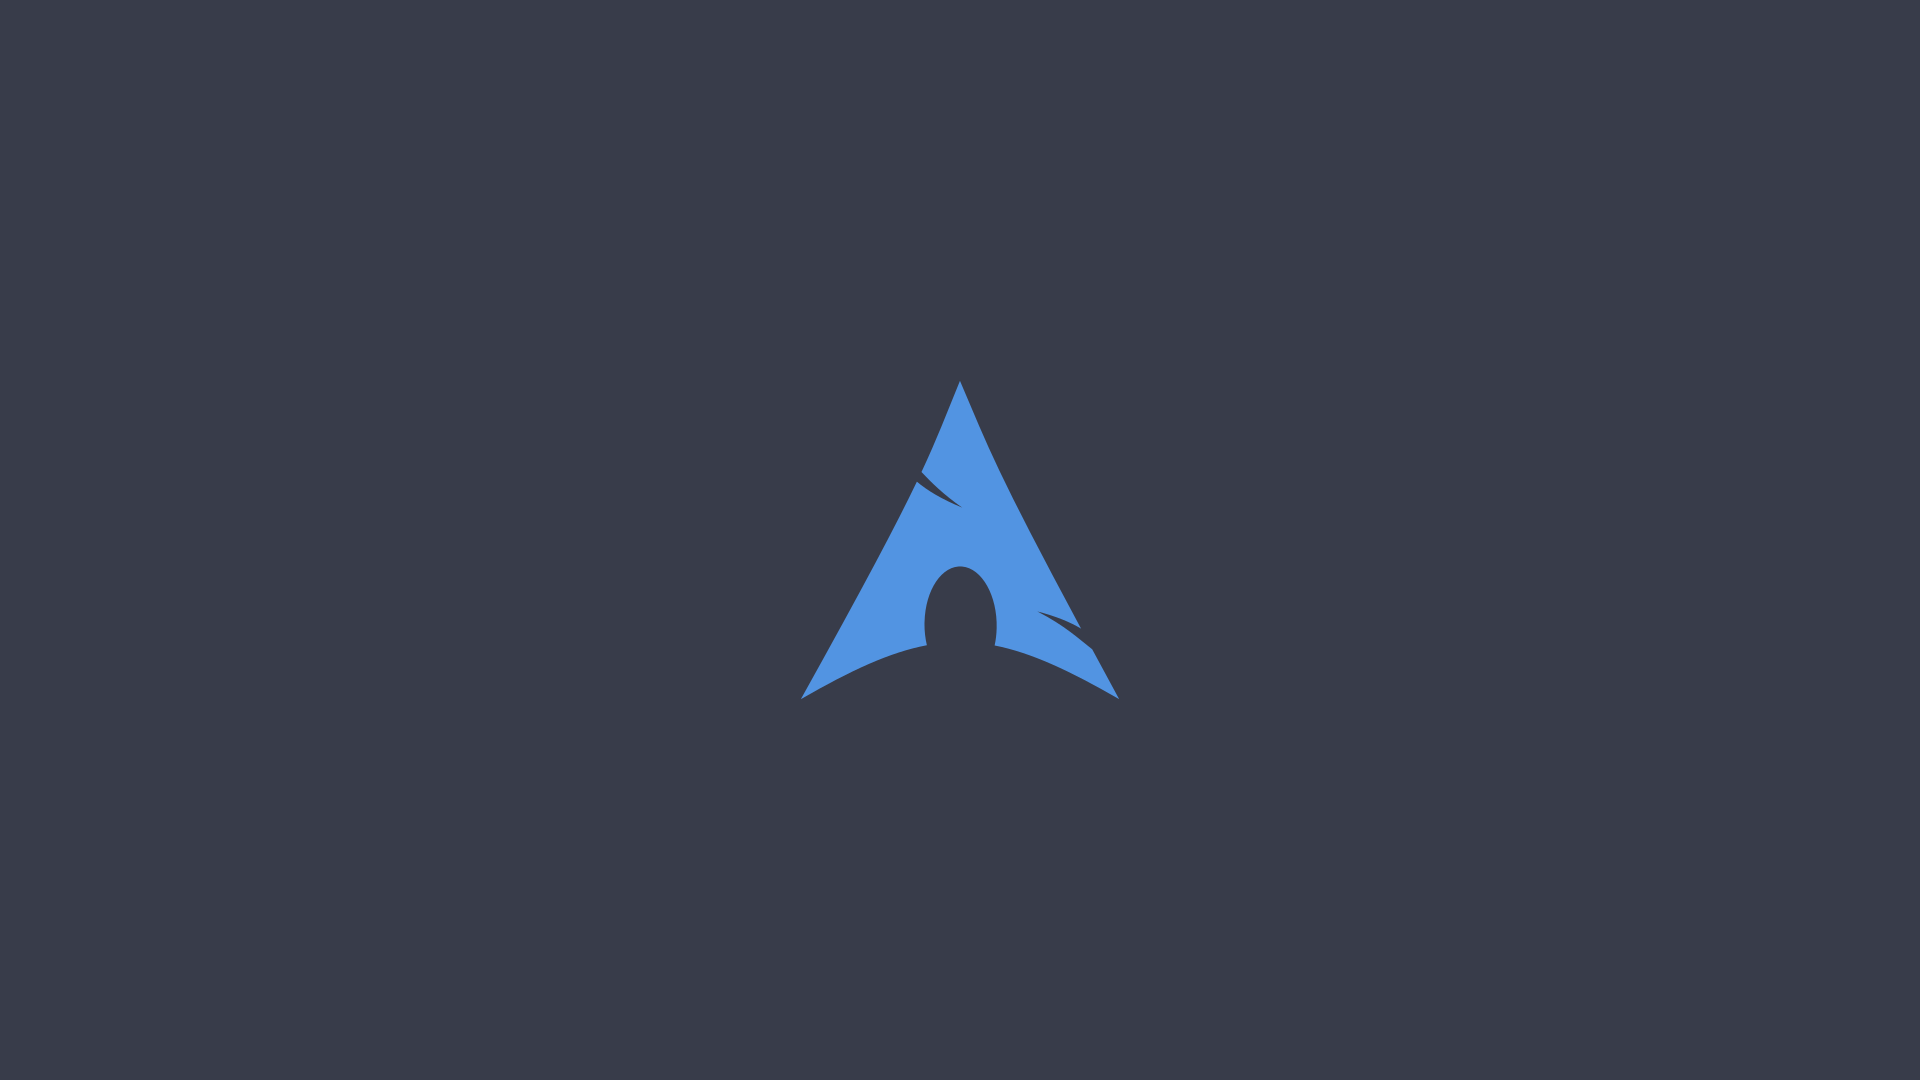 Clean and Simple Arc Dark Arch wallpaper